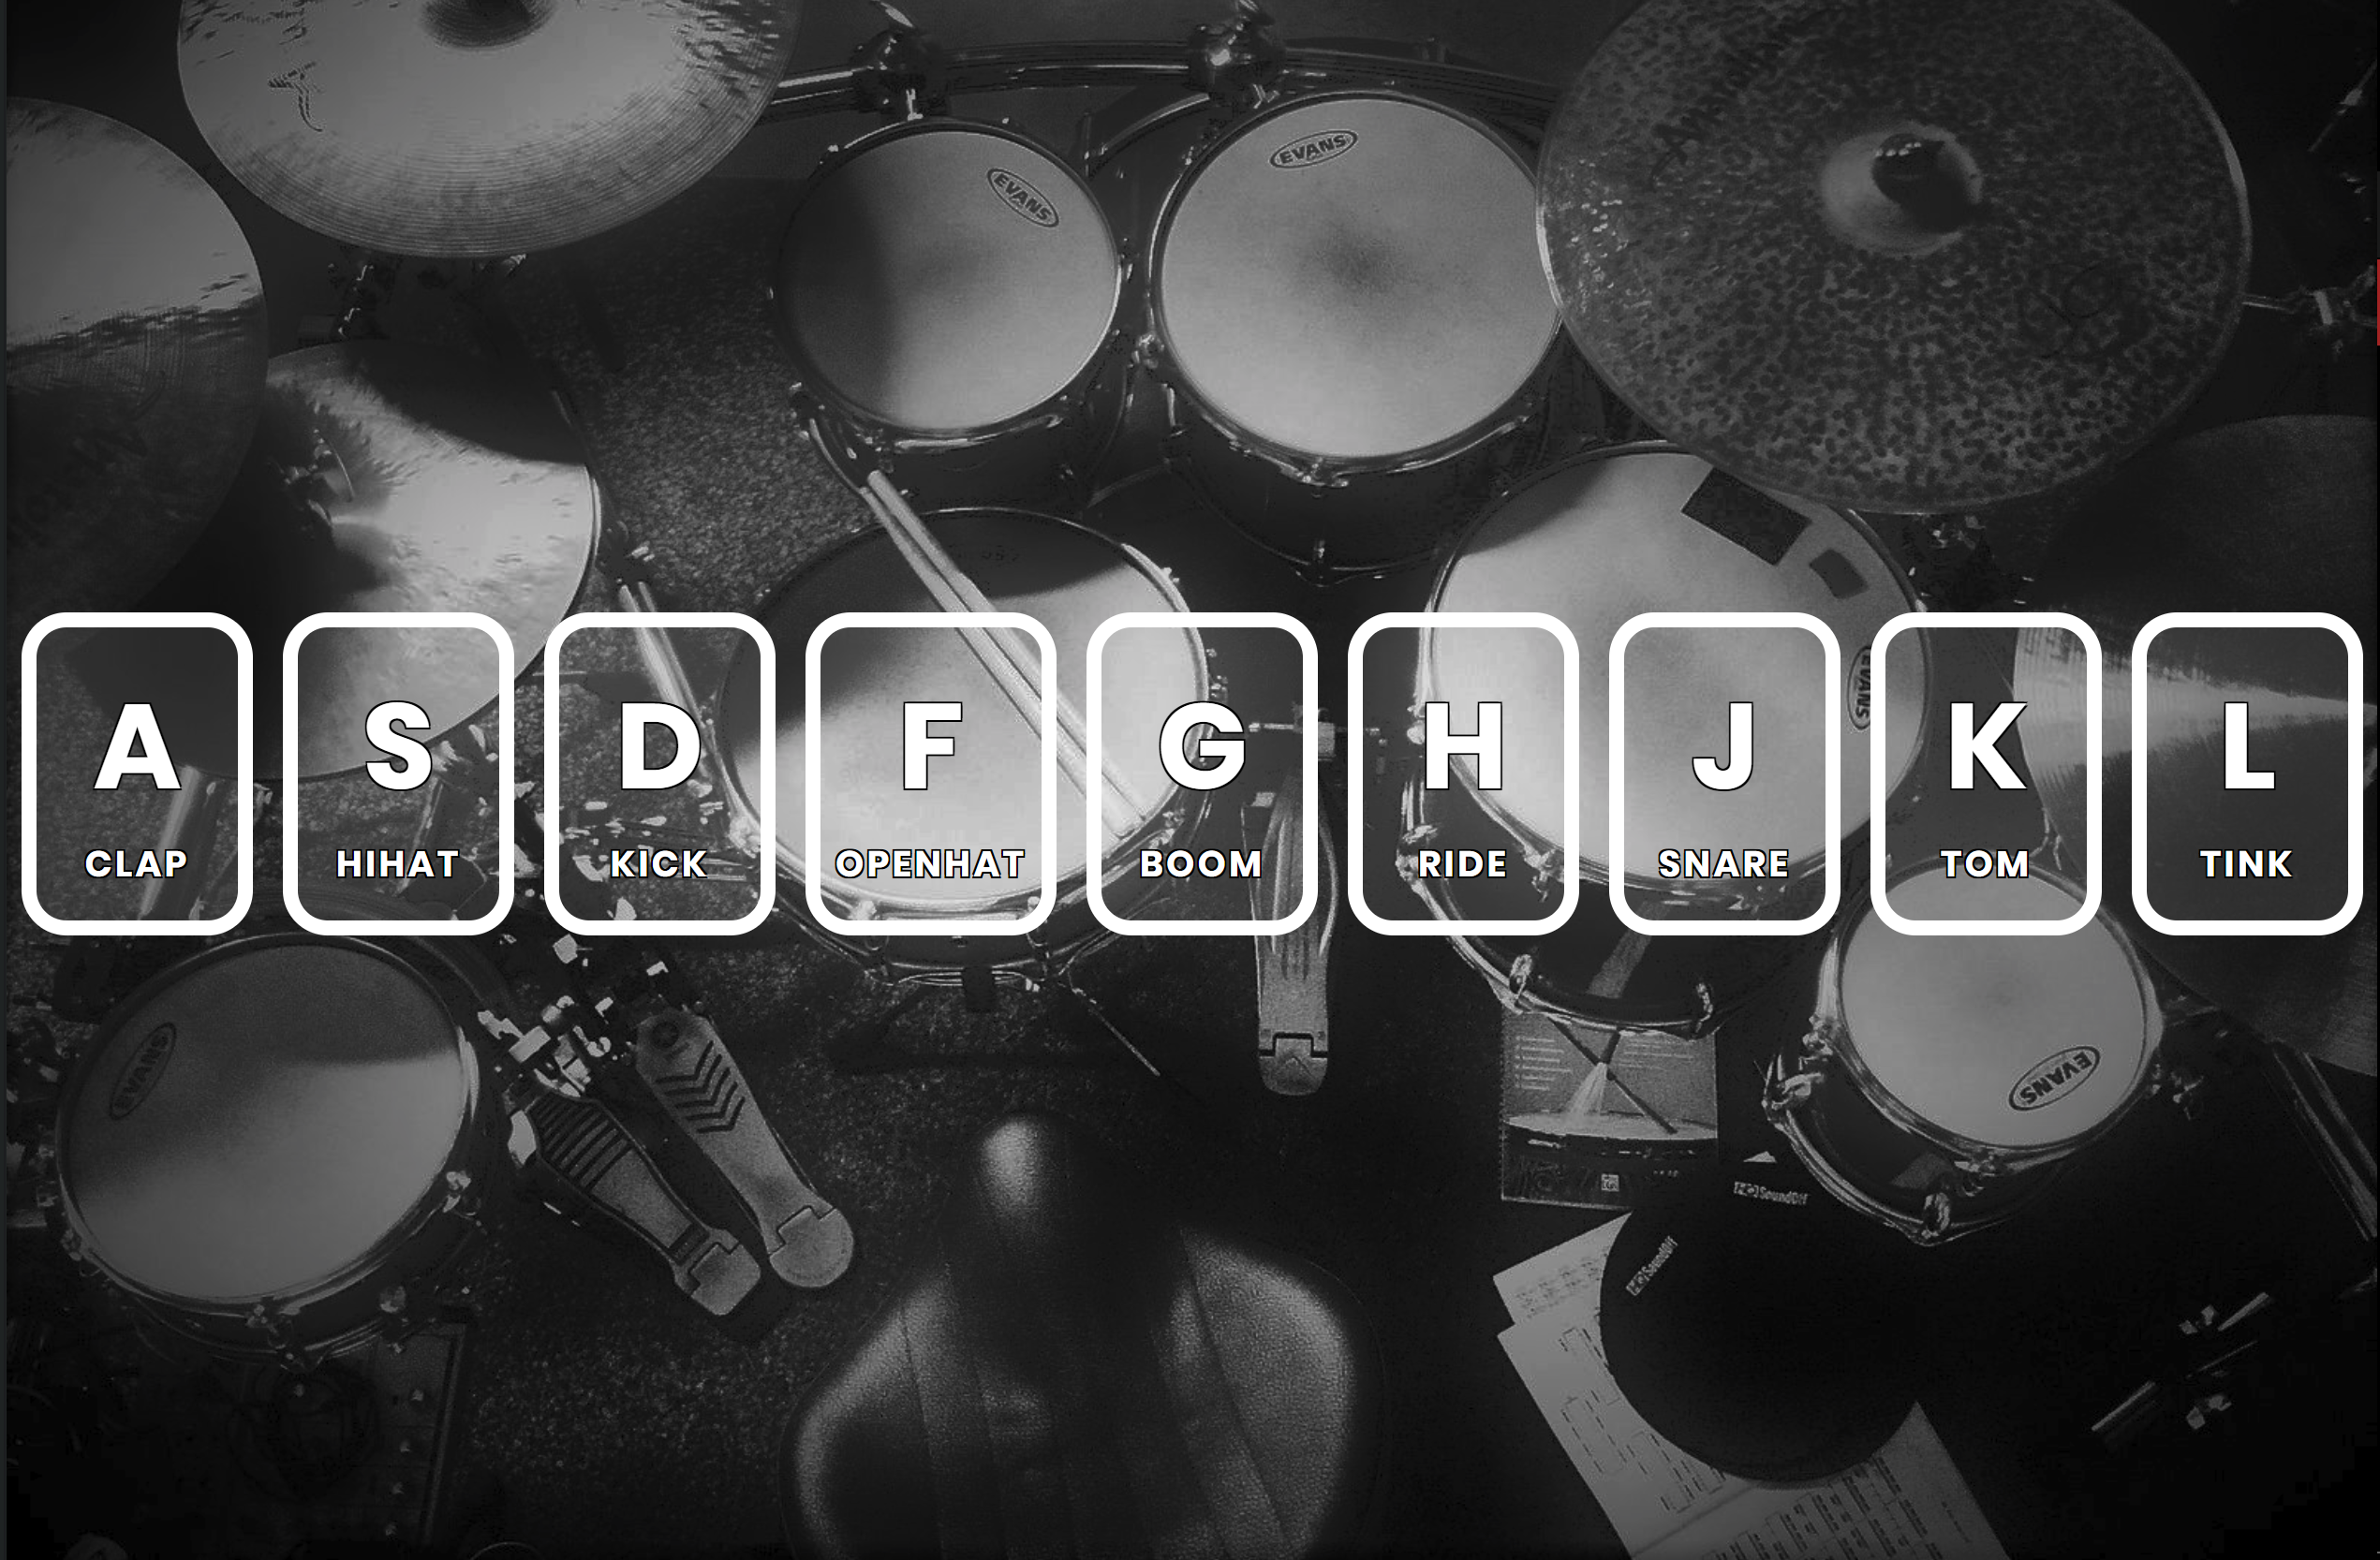 preview of drum kit page, showing a row of keyboard keys over a black and white image of a drum kit